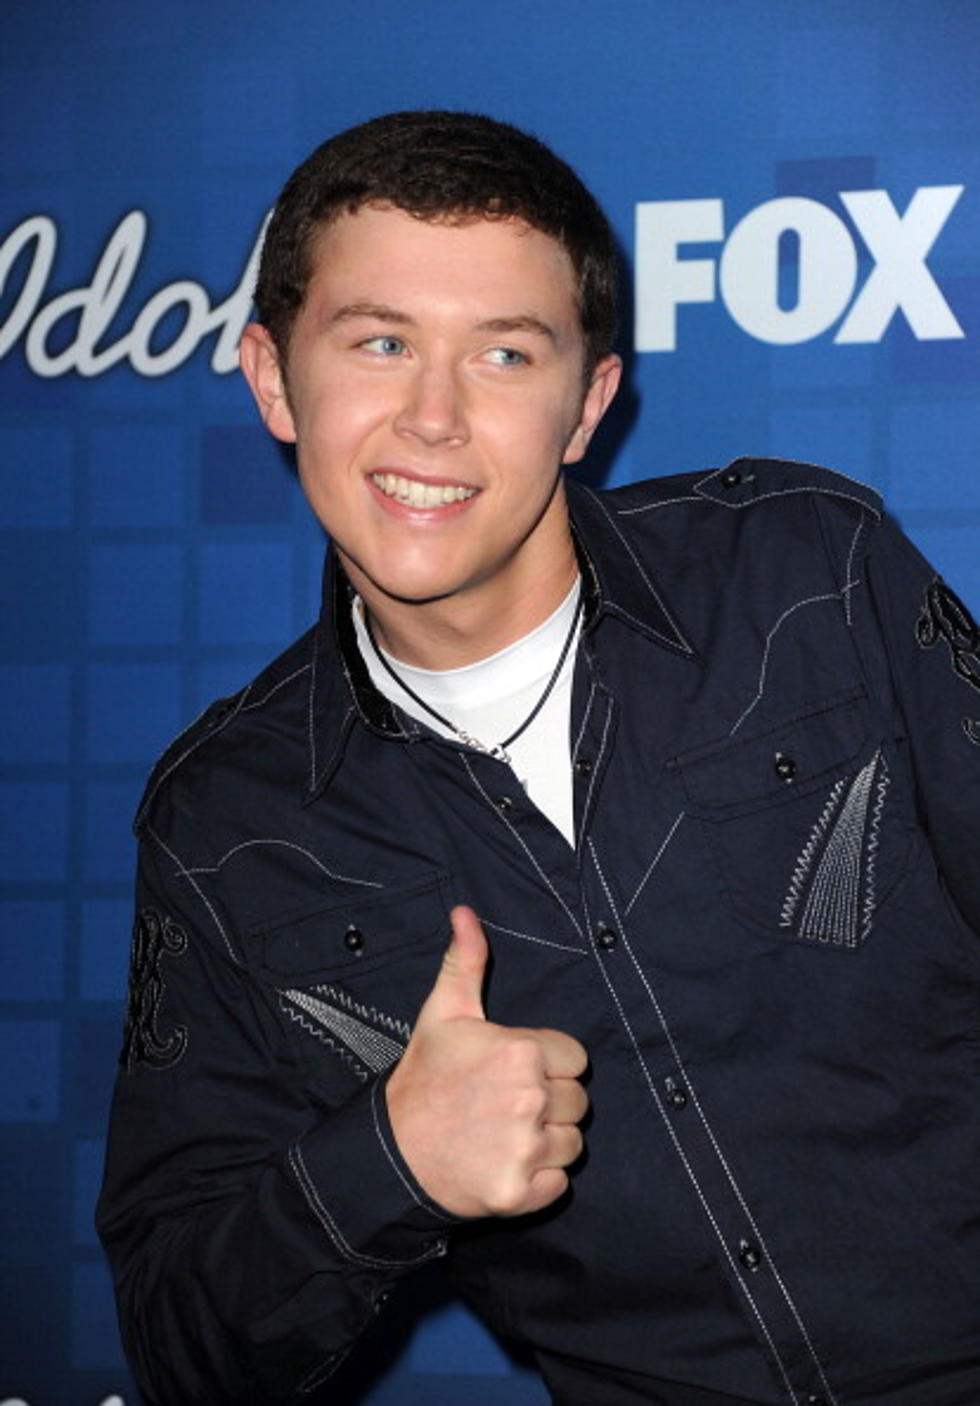 Scotty & Lauren Our Country Kids On American Idol Last Night [VIDEO]